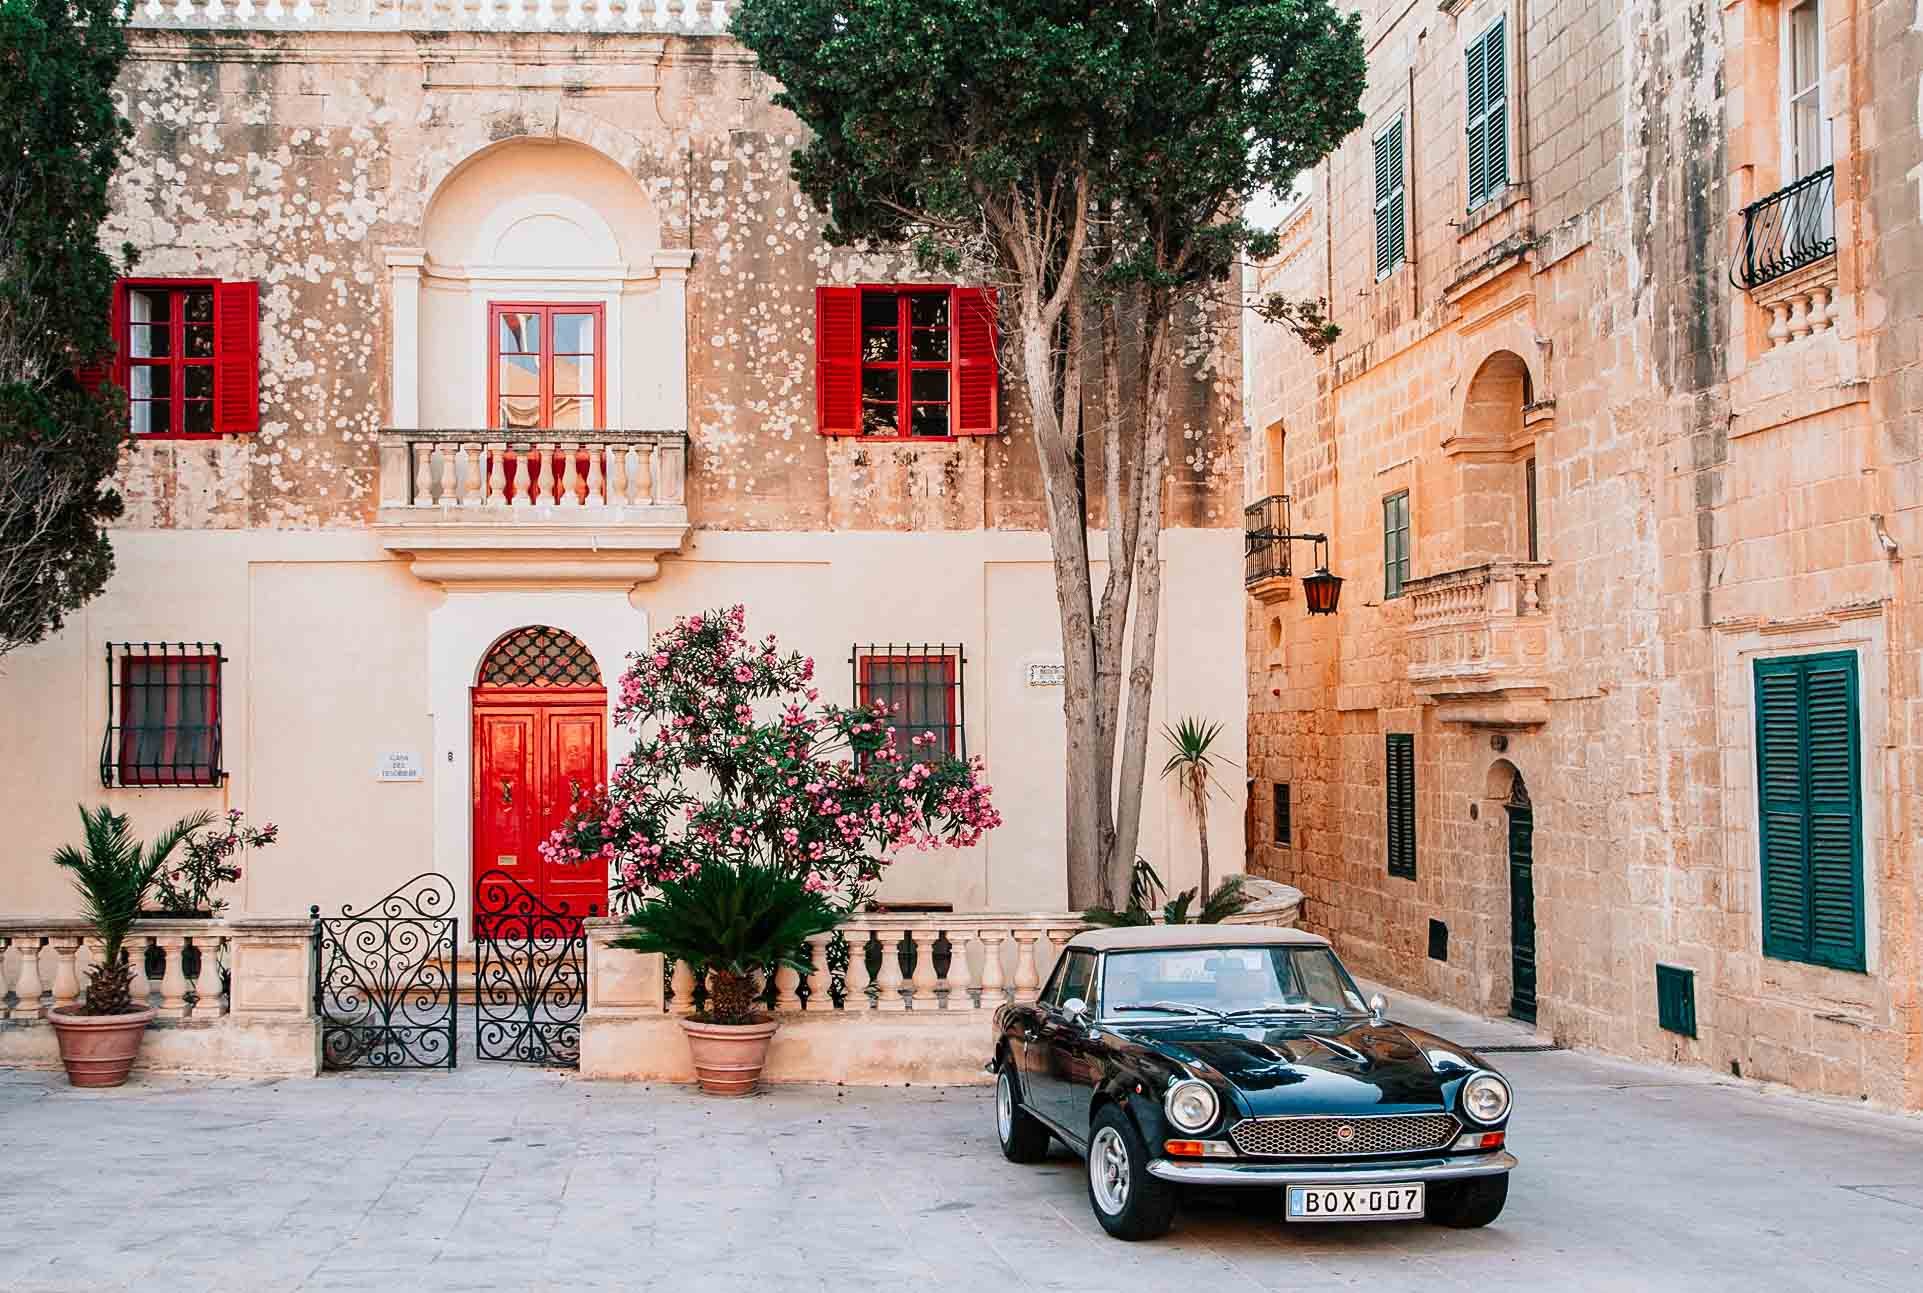 A car parked outside a rustic house in the Mdina from Valletta Mdina via buses to Mdina